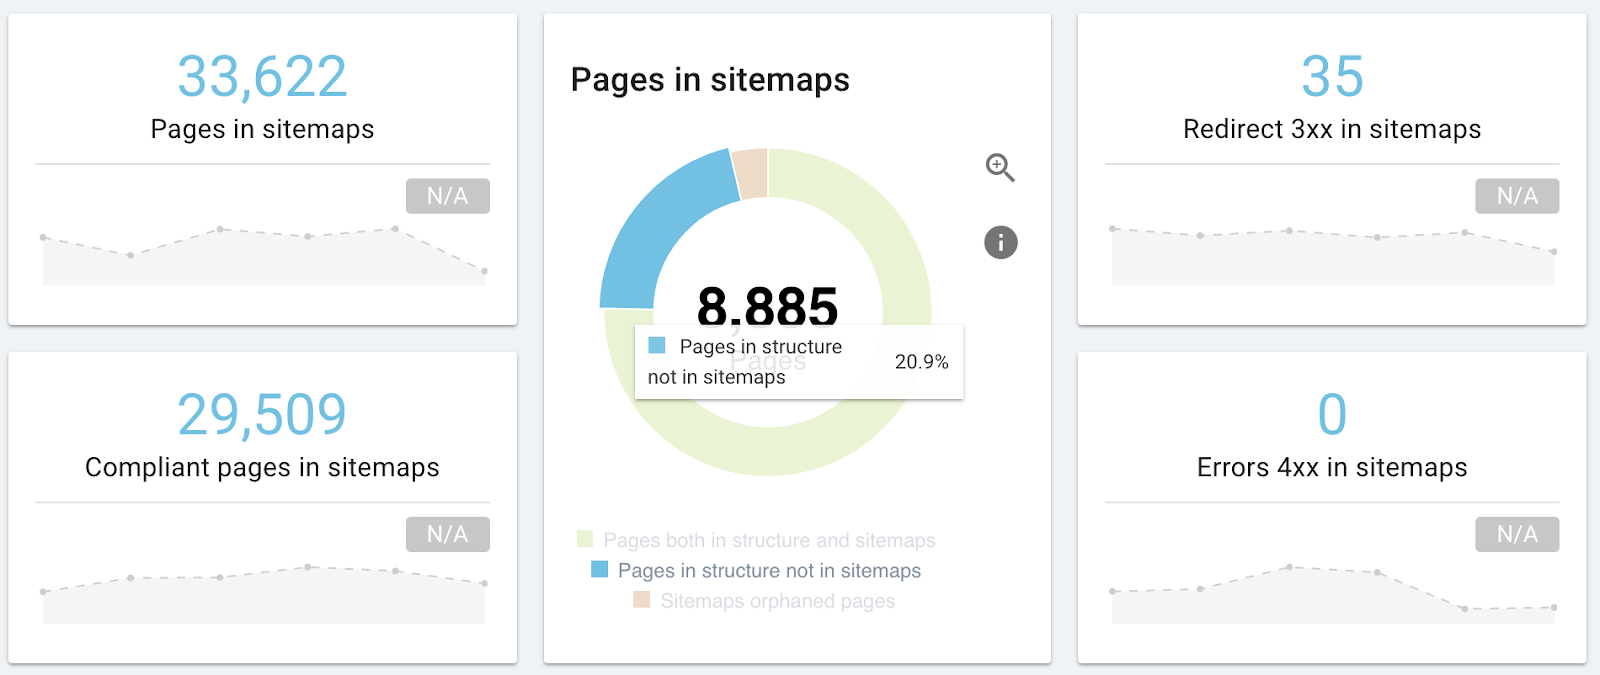 pages in sitemaps